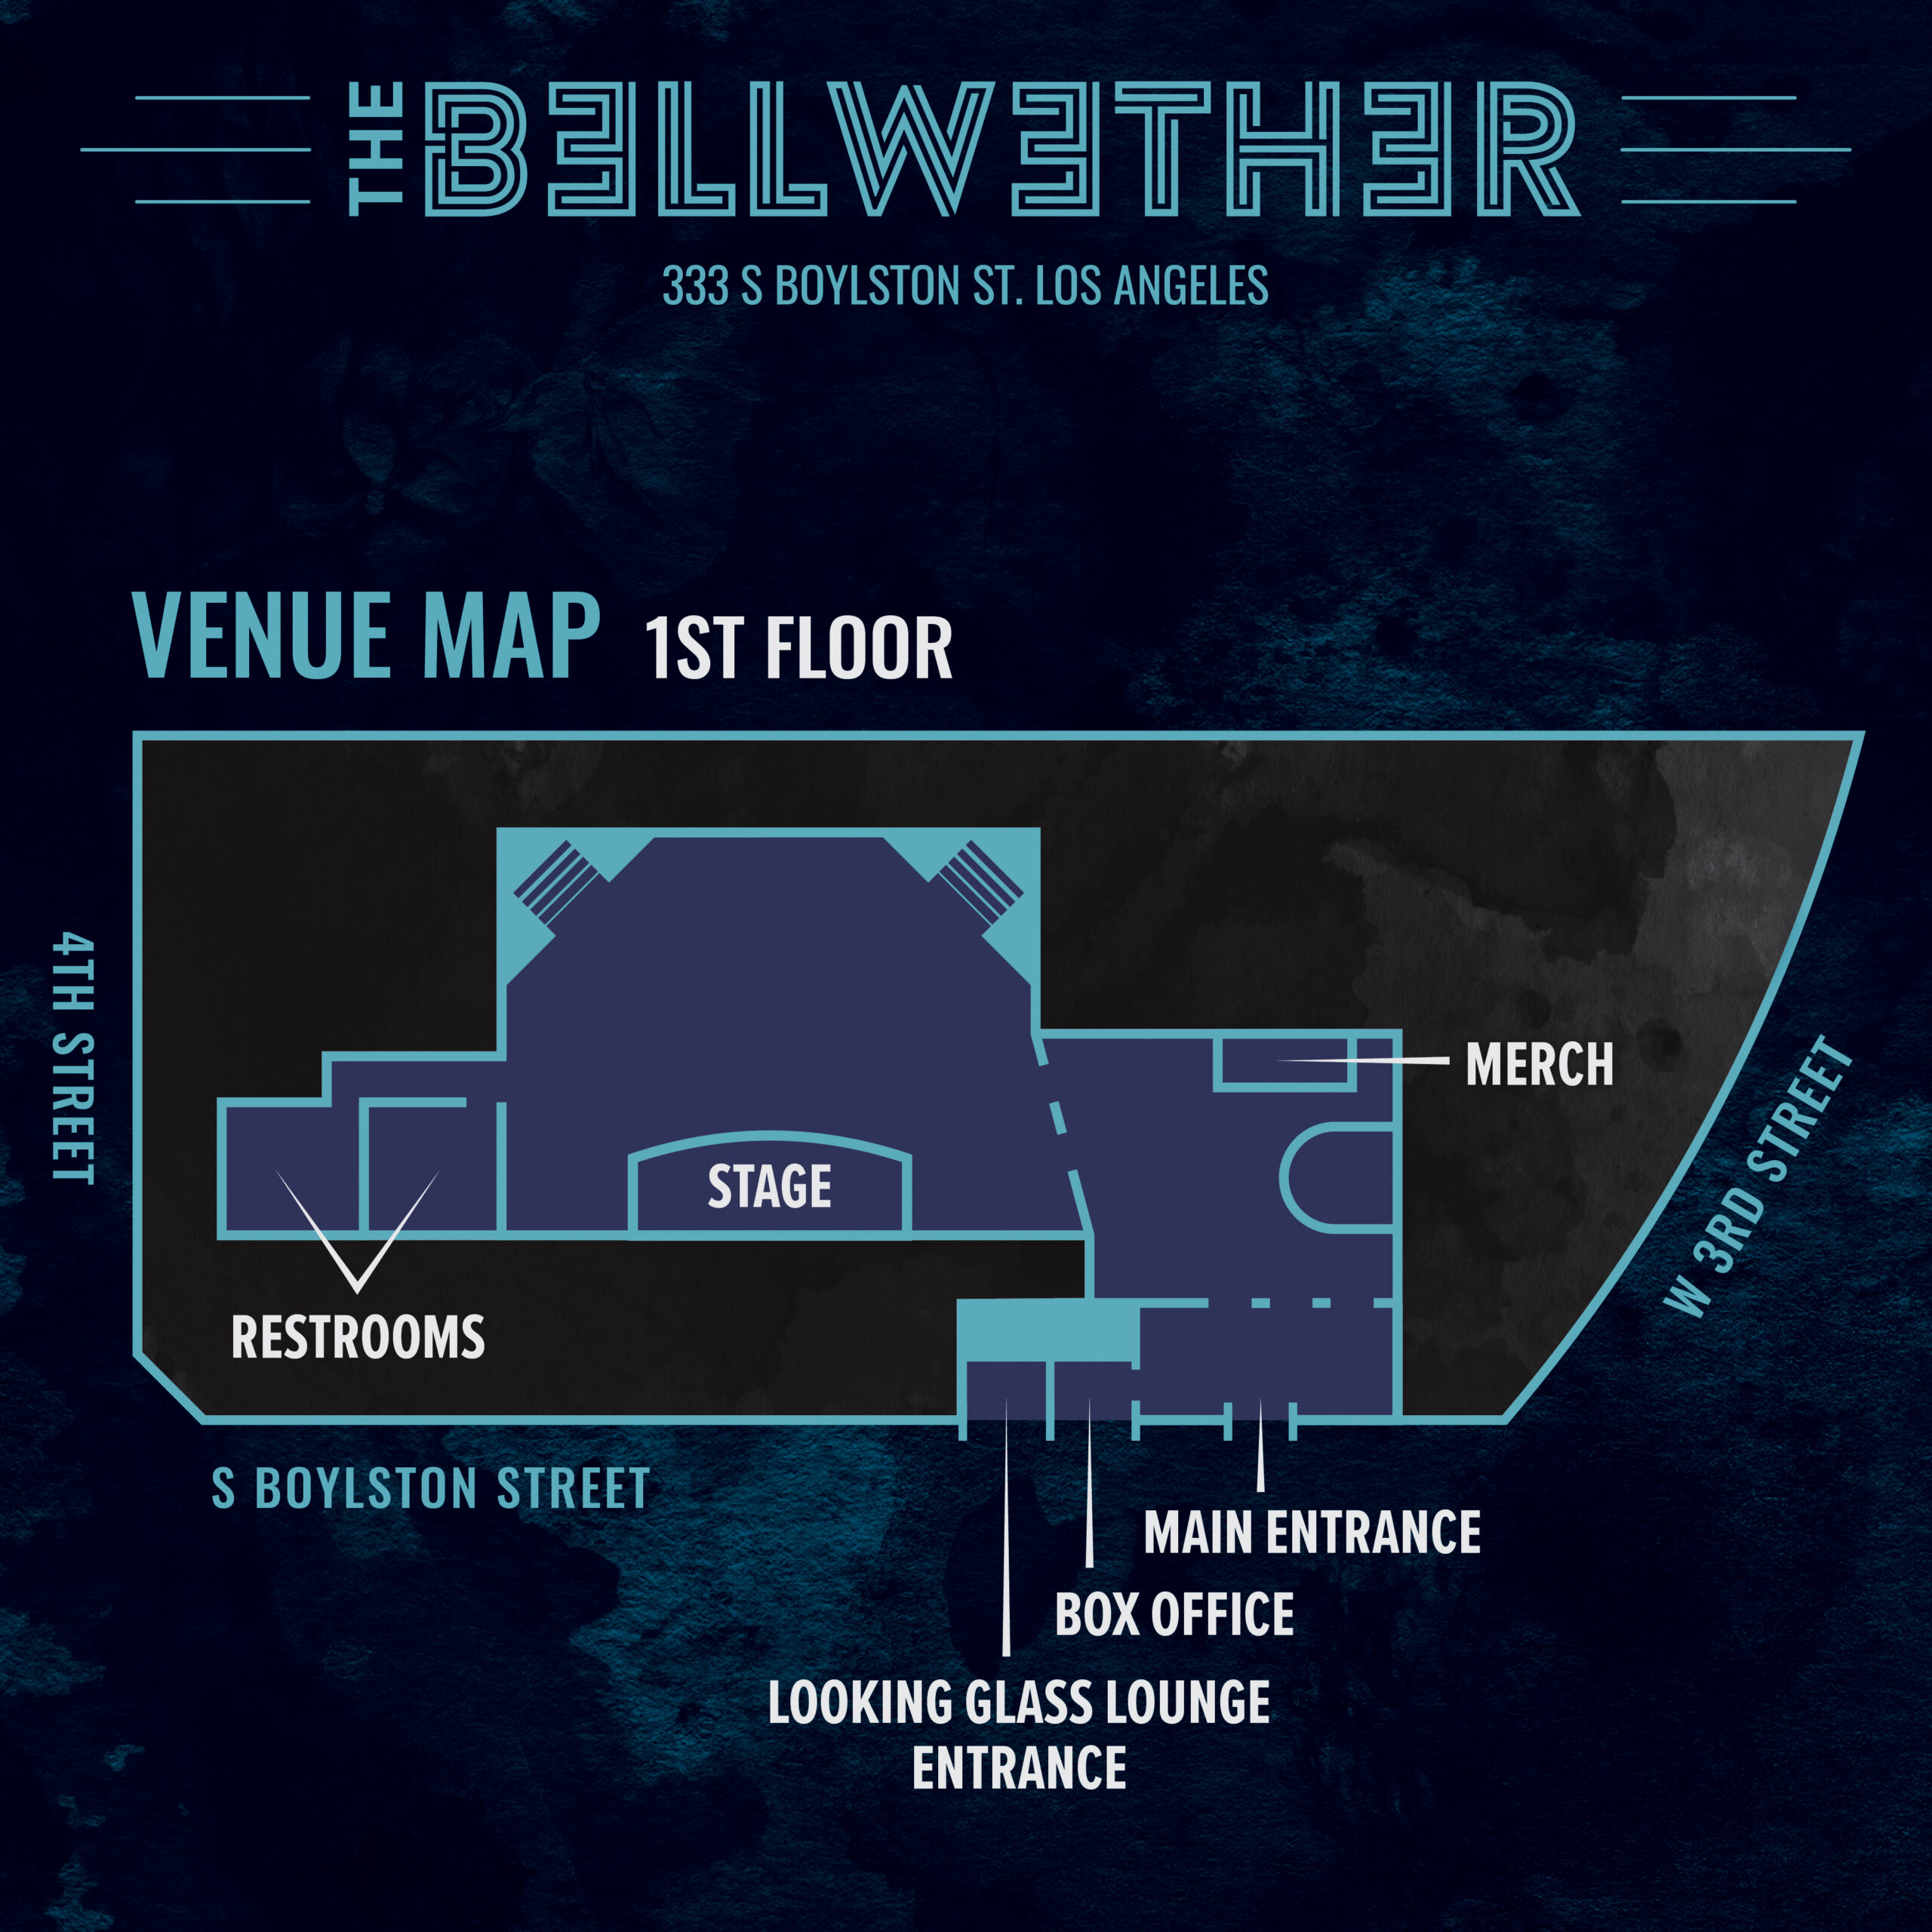 Tickets & Box Office | The Bellwether